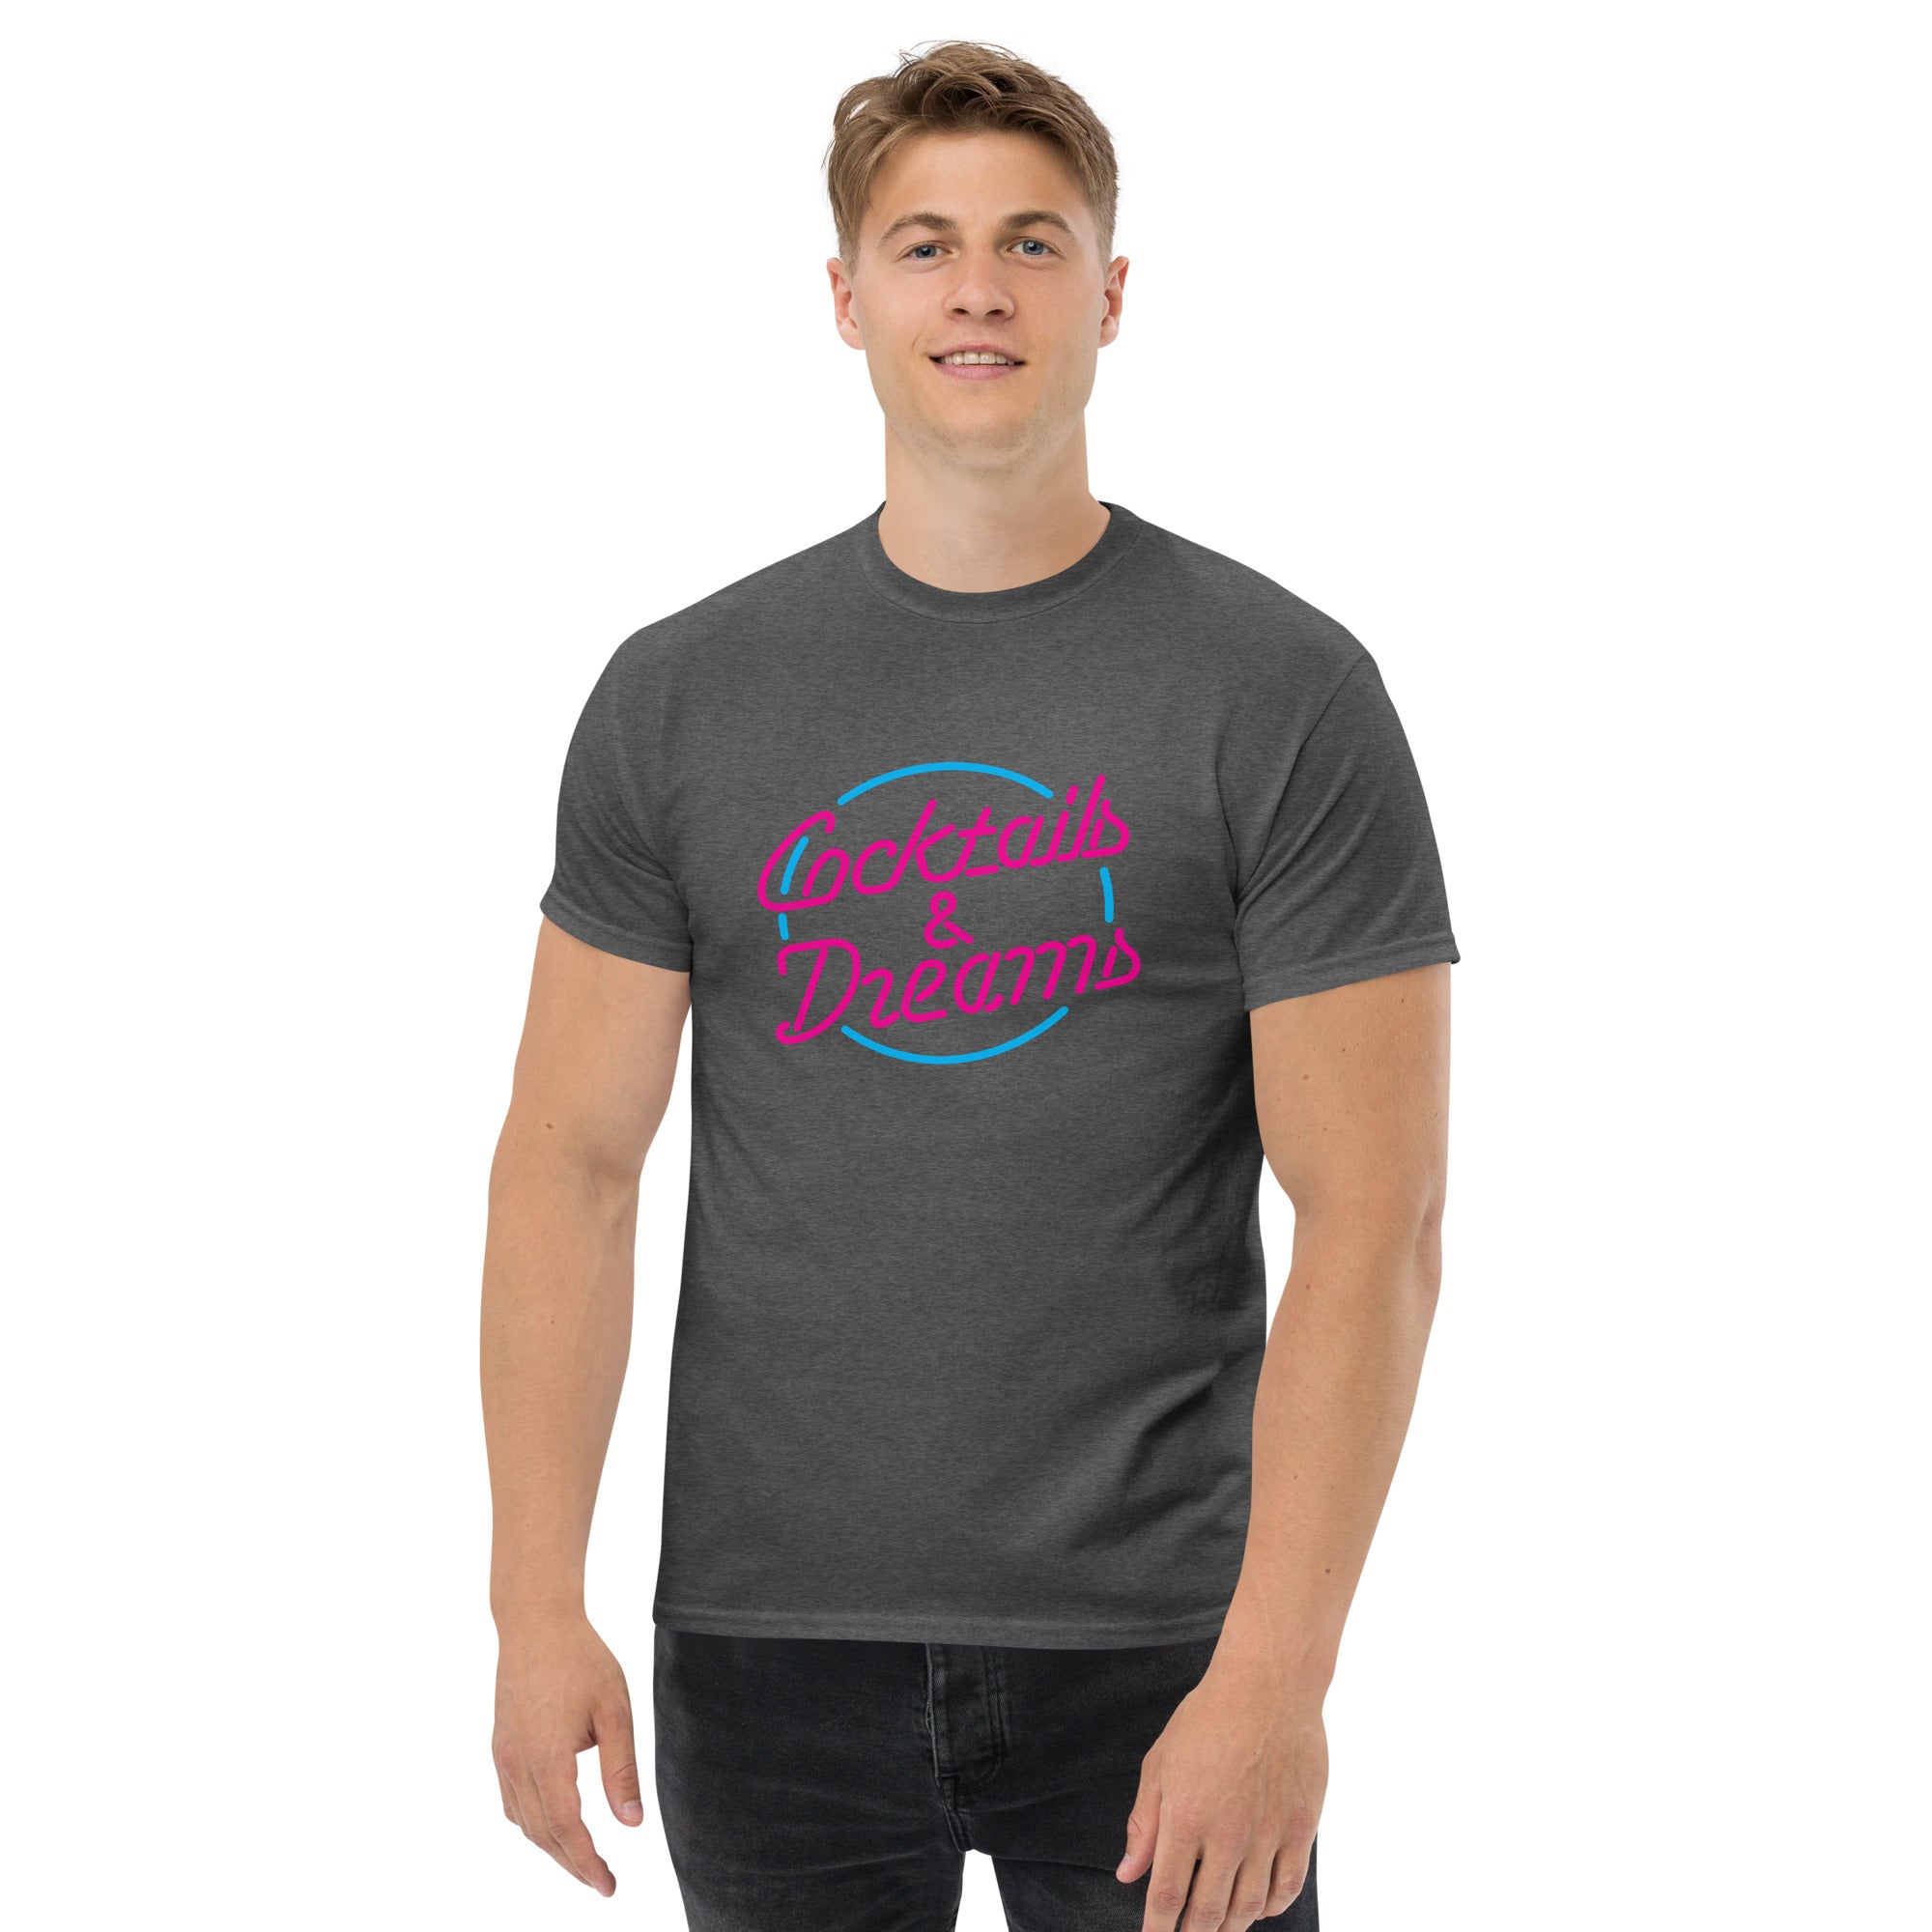 Cocktails and Dreams Shirt